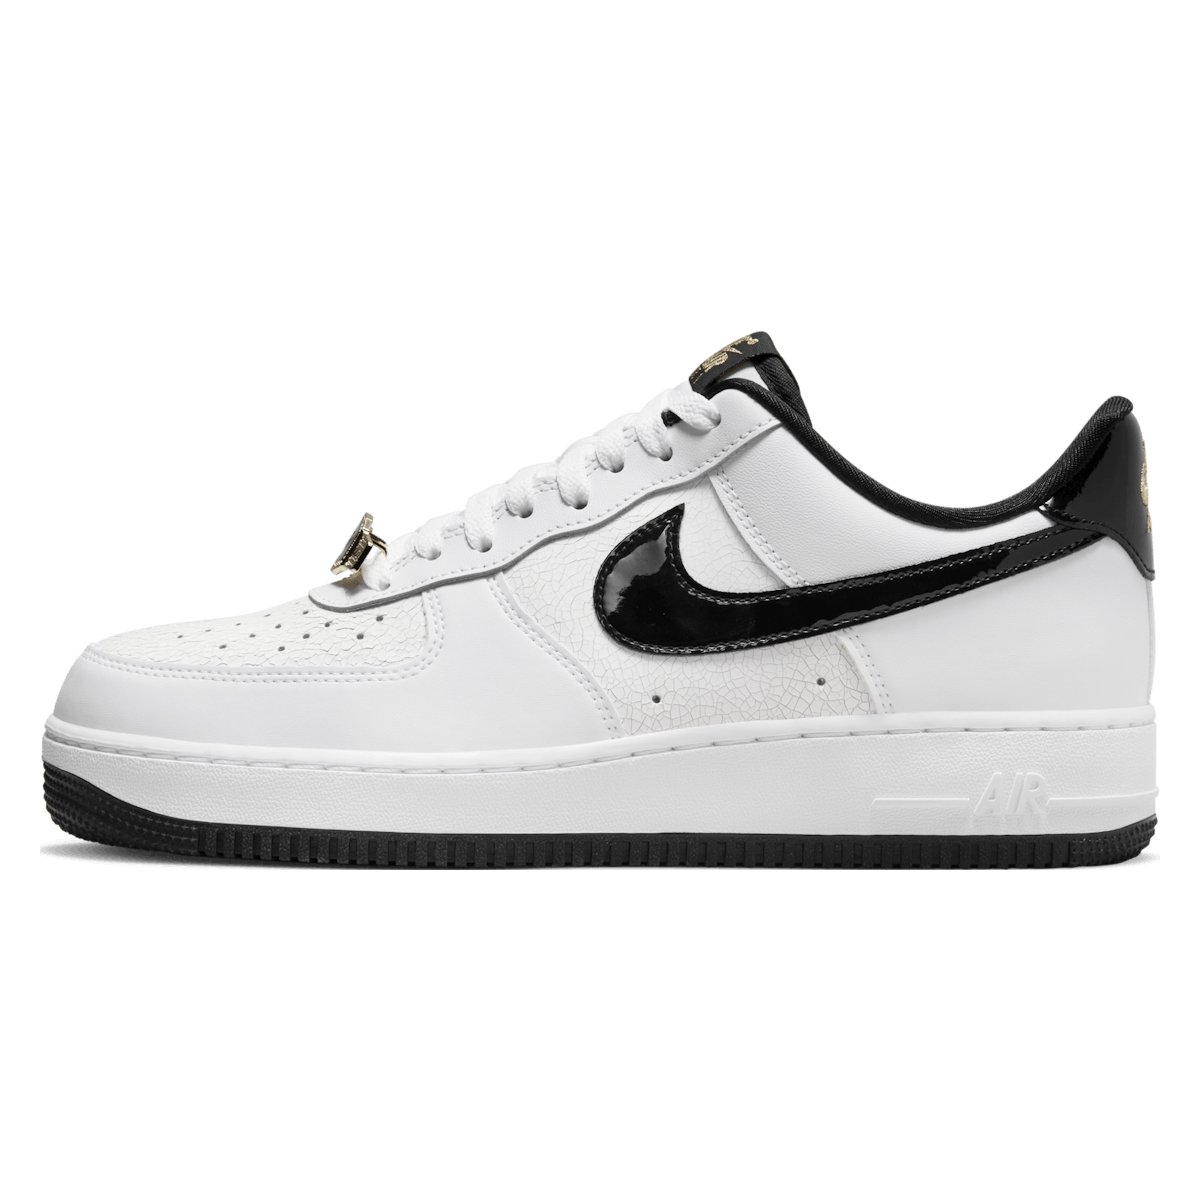 Nike Air Force 1 Low "World Champion"